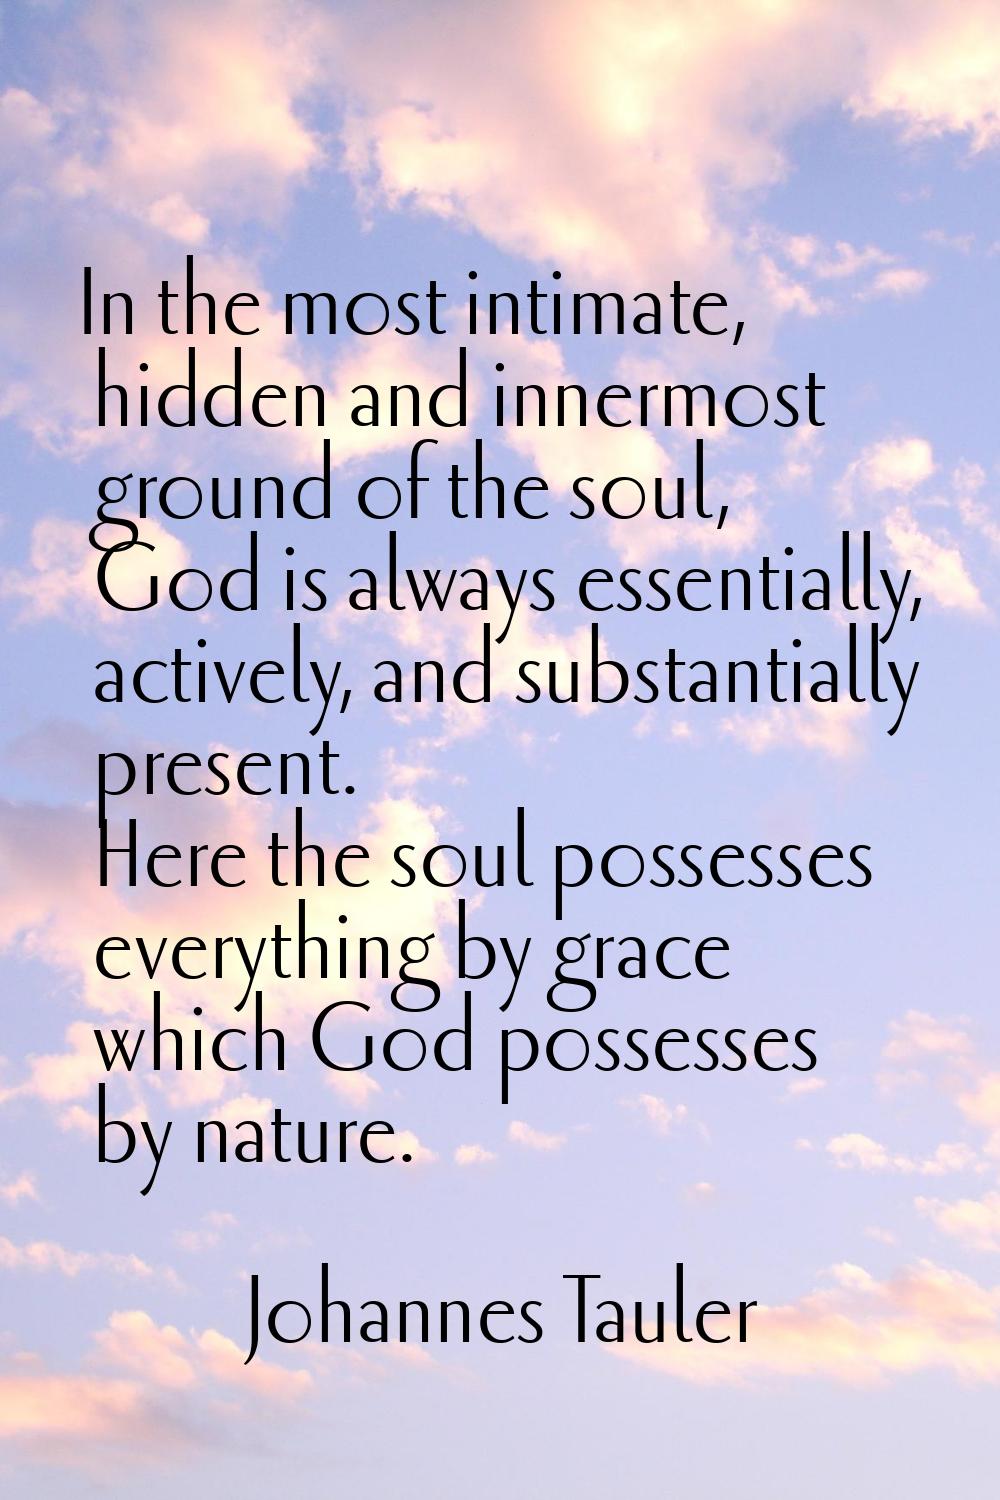 In the most intimate, hidden and innermost ground of the soul, God is always essentially, actively,